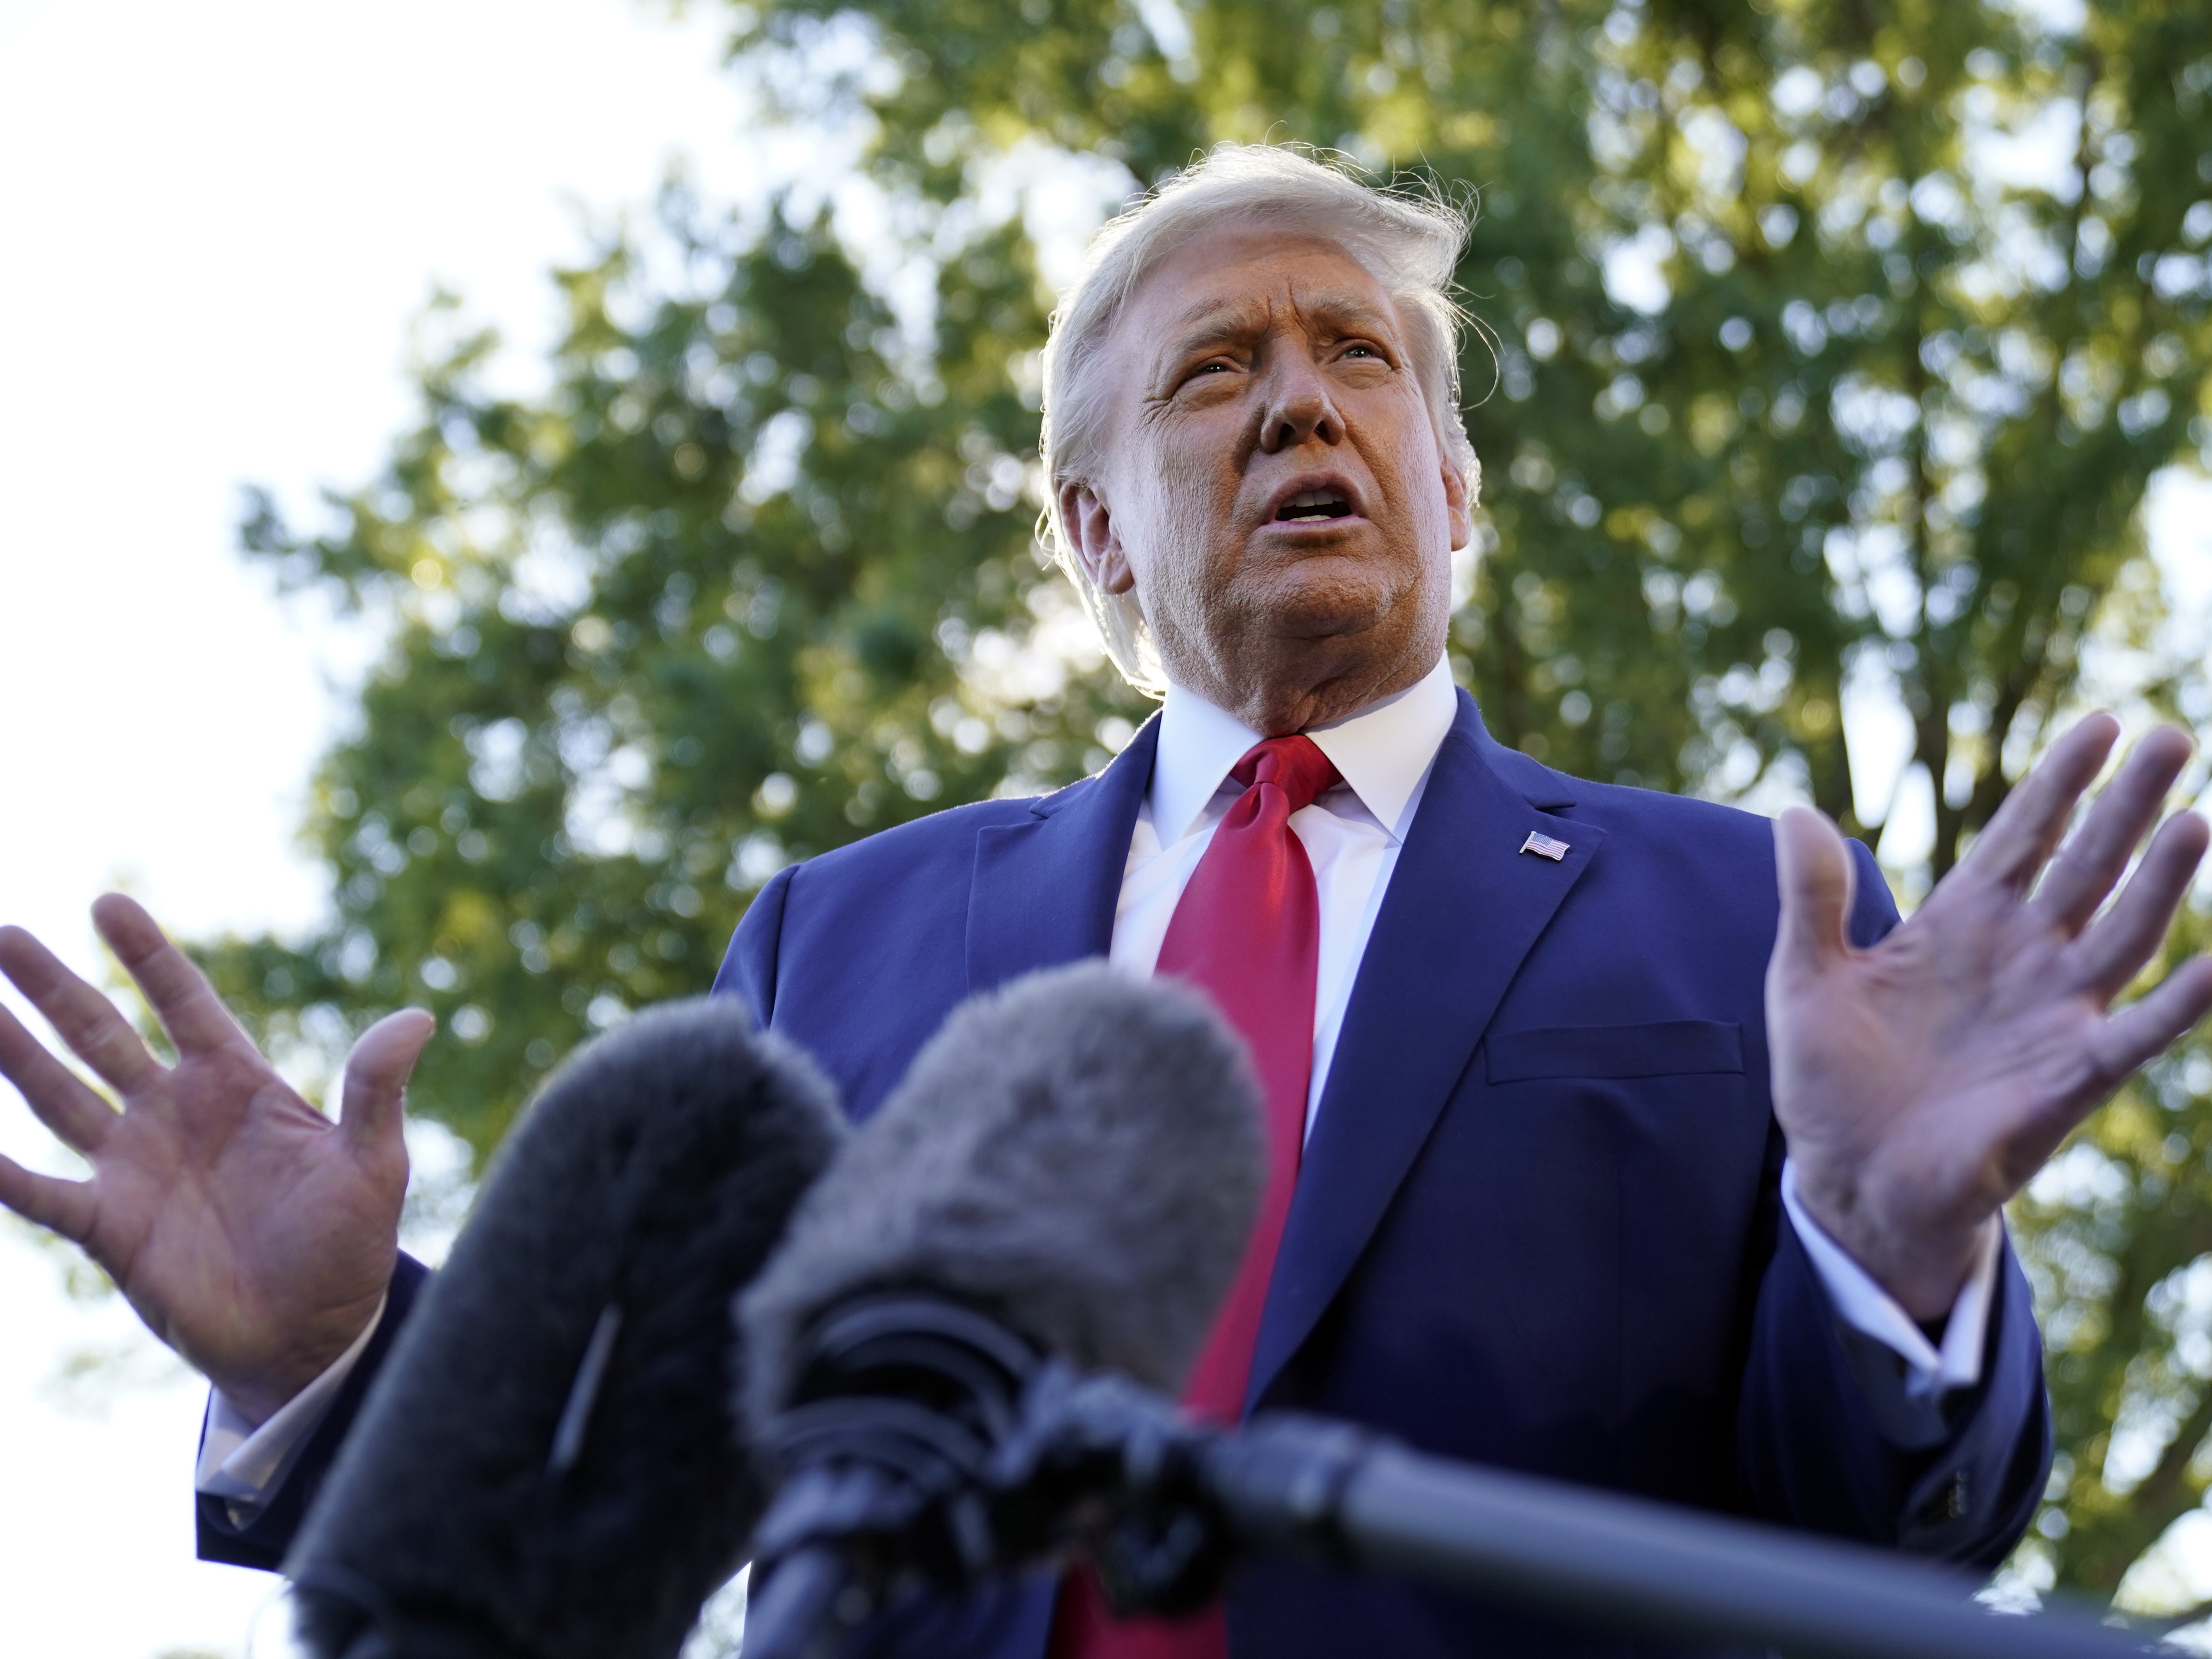 President Donald Trump speaks to reporters on the South Lawn of the White House, Monday, Sept. 21, 2020, before leaving for a short trip to Andrews Air Force Base, Md., and then onto Ohio for rallies. (AP Photo/Andrew Harnik)